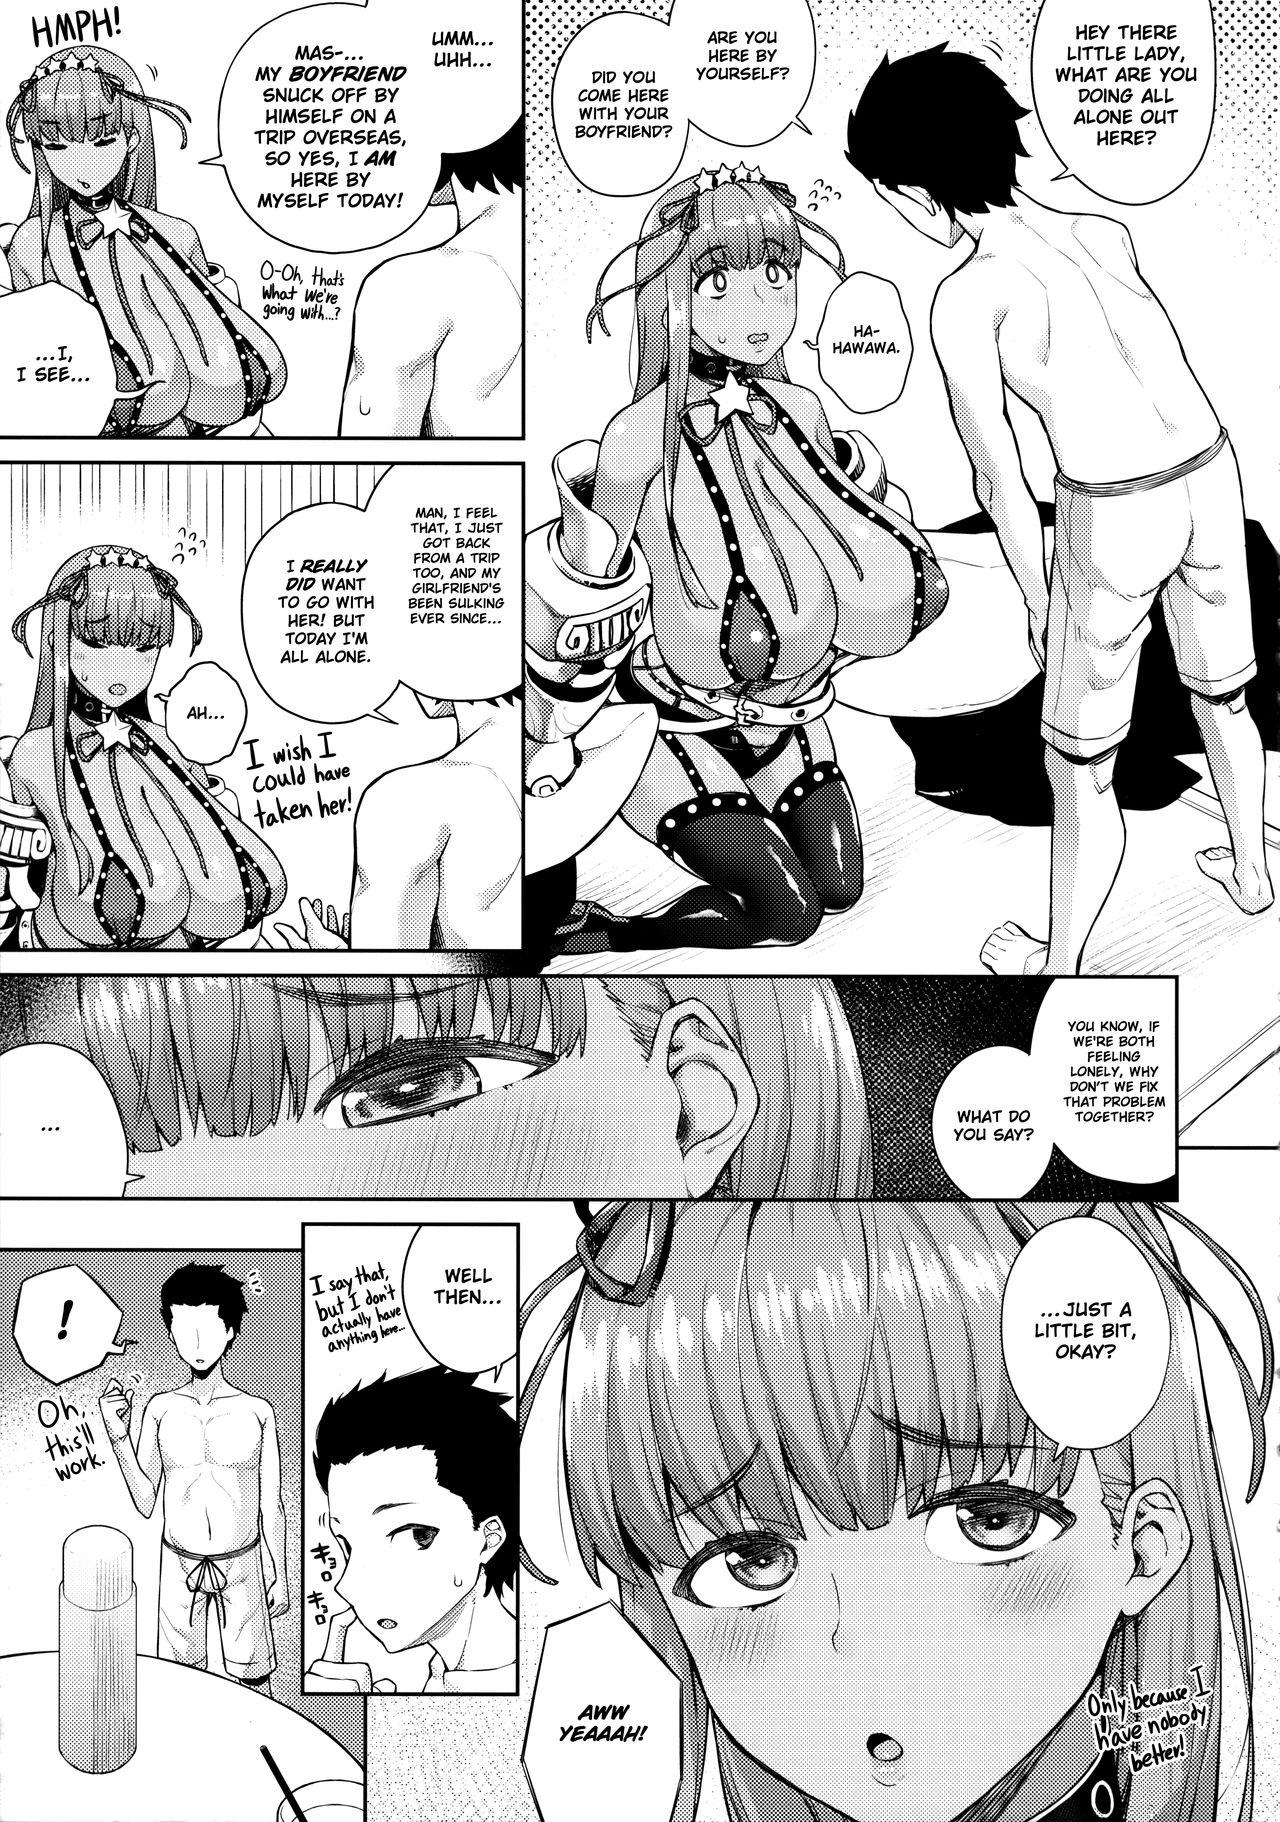 Clothed Sex Kyokou no Umibe nite | at the fictional seaside - Fate grand order Perverted - Page 5